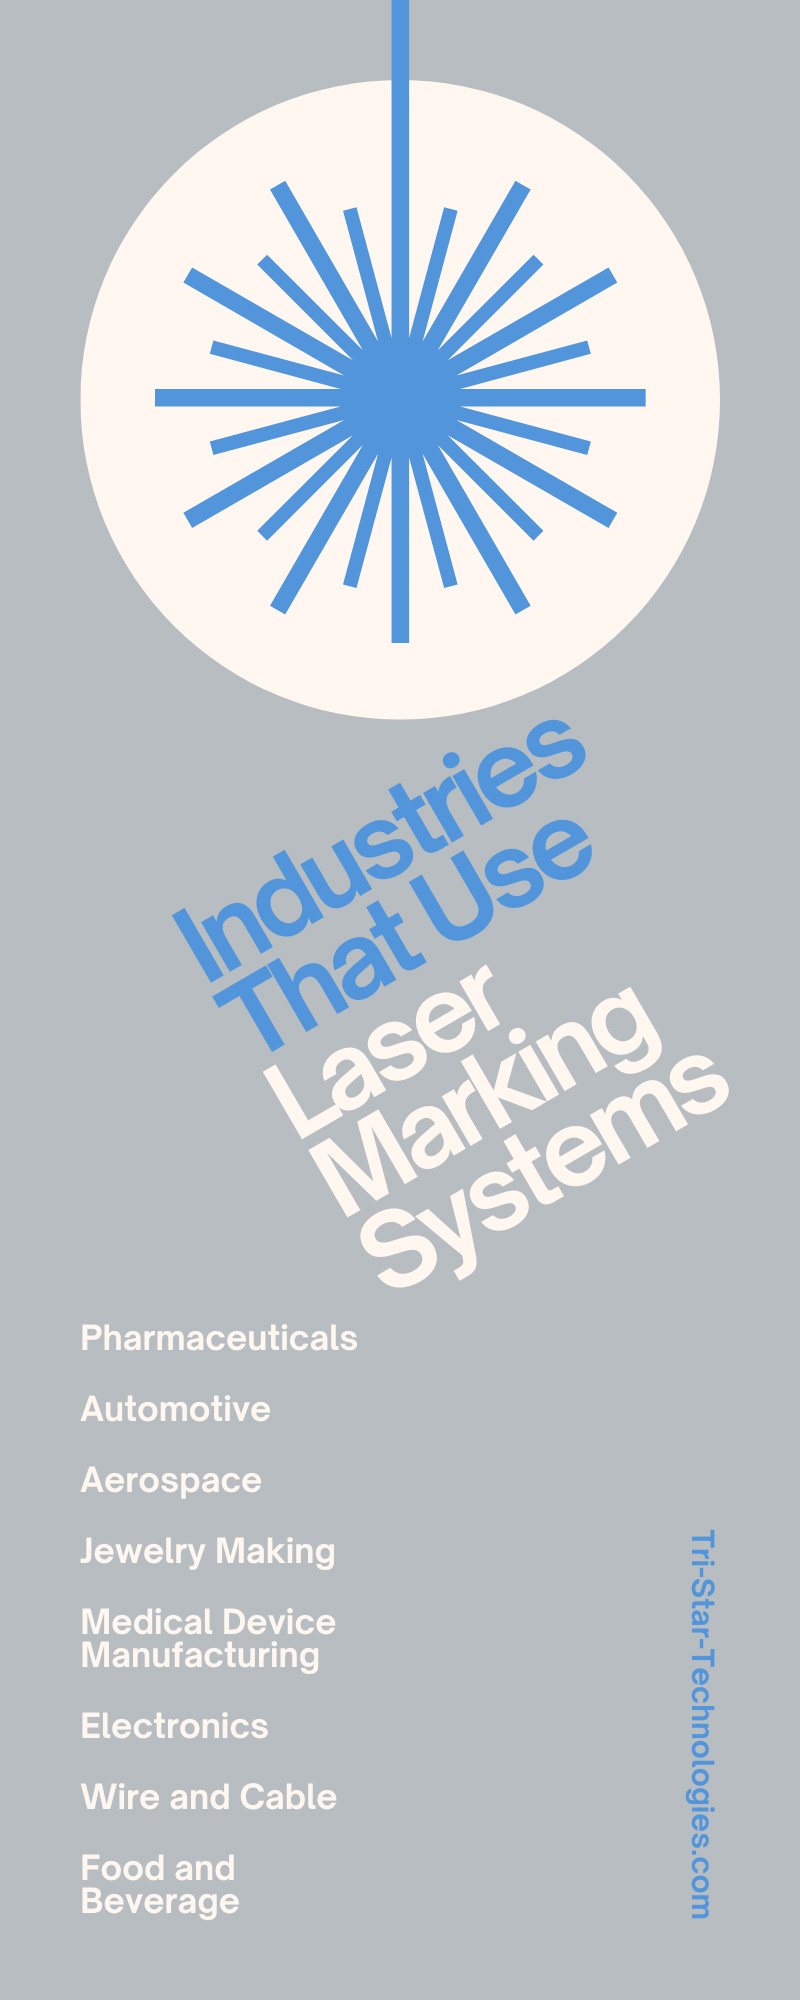 How 8 Industries Use Laser Marking Systems